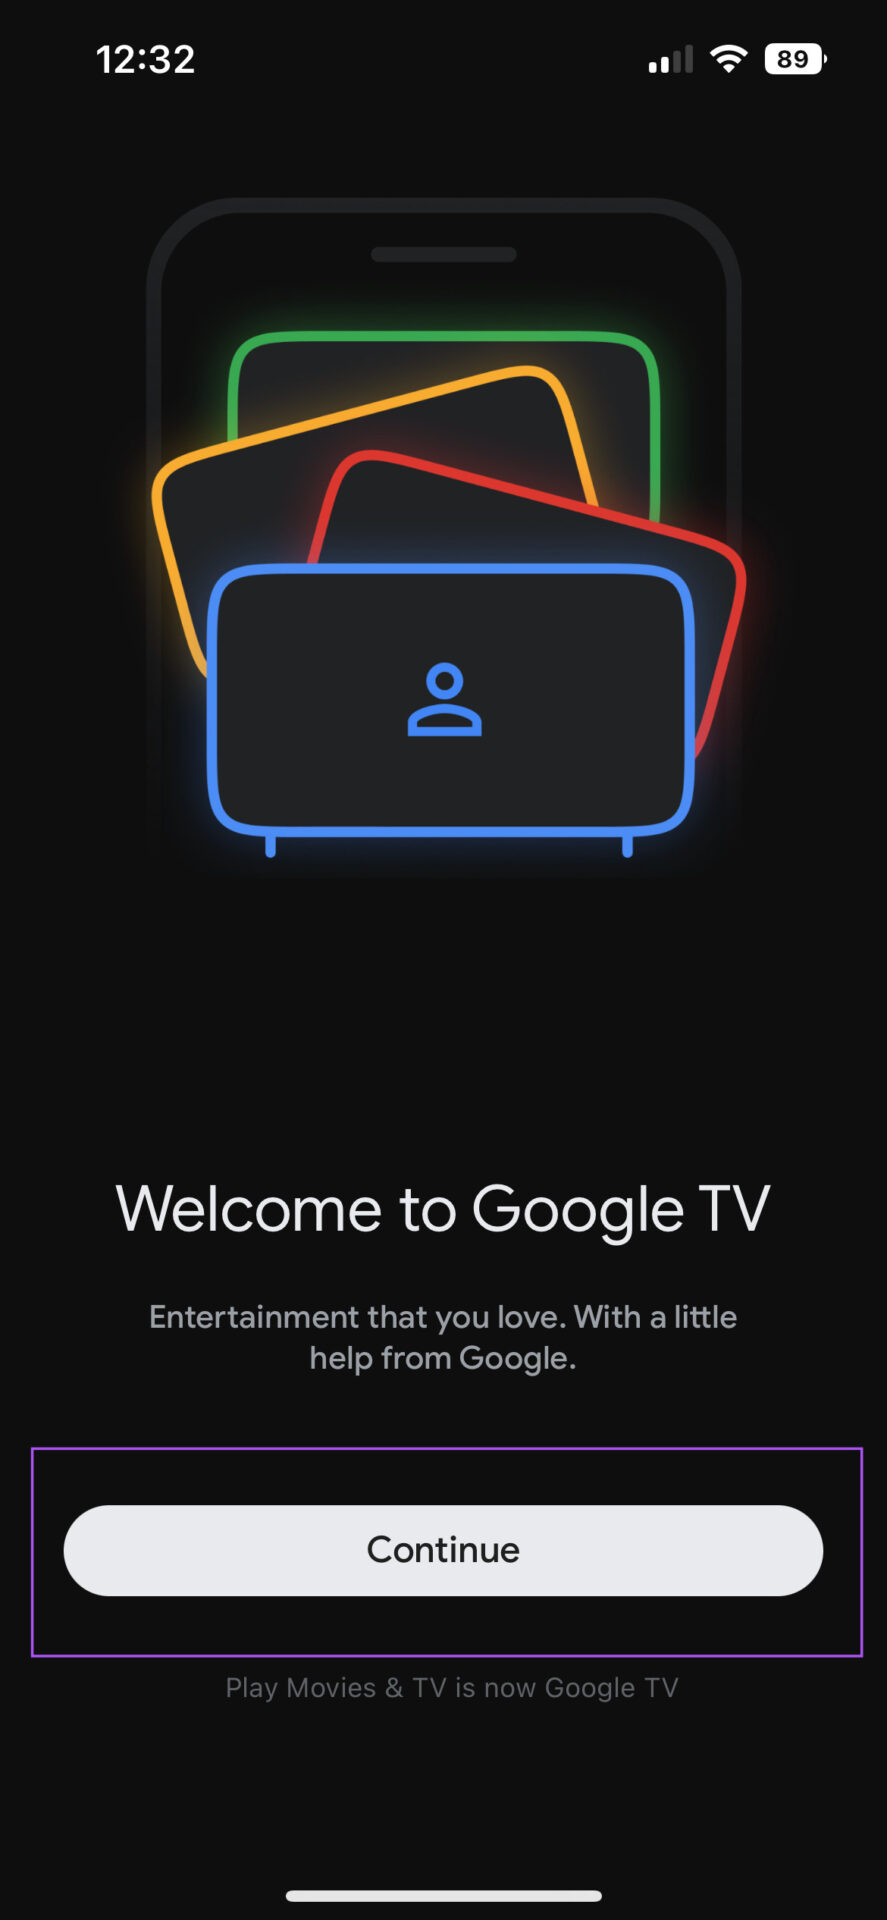 How to Use iPhone as Google TV Remote - 68